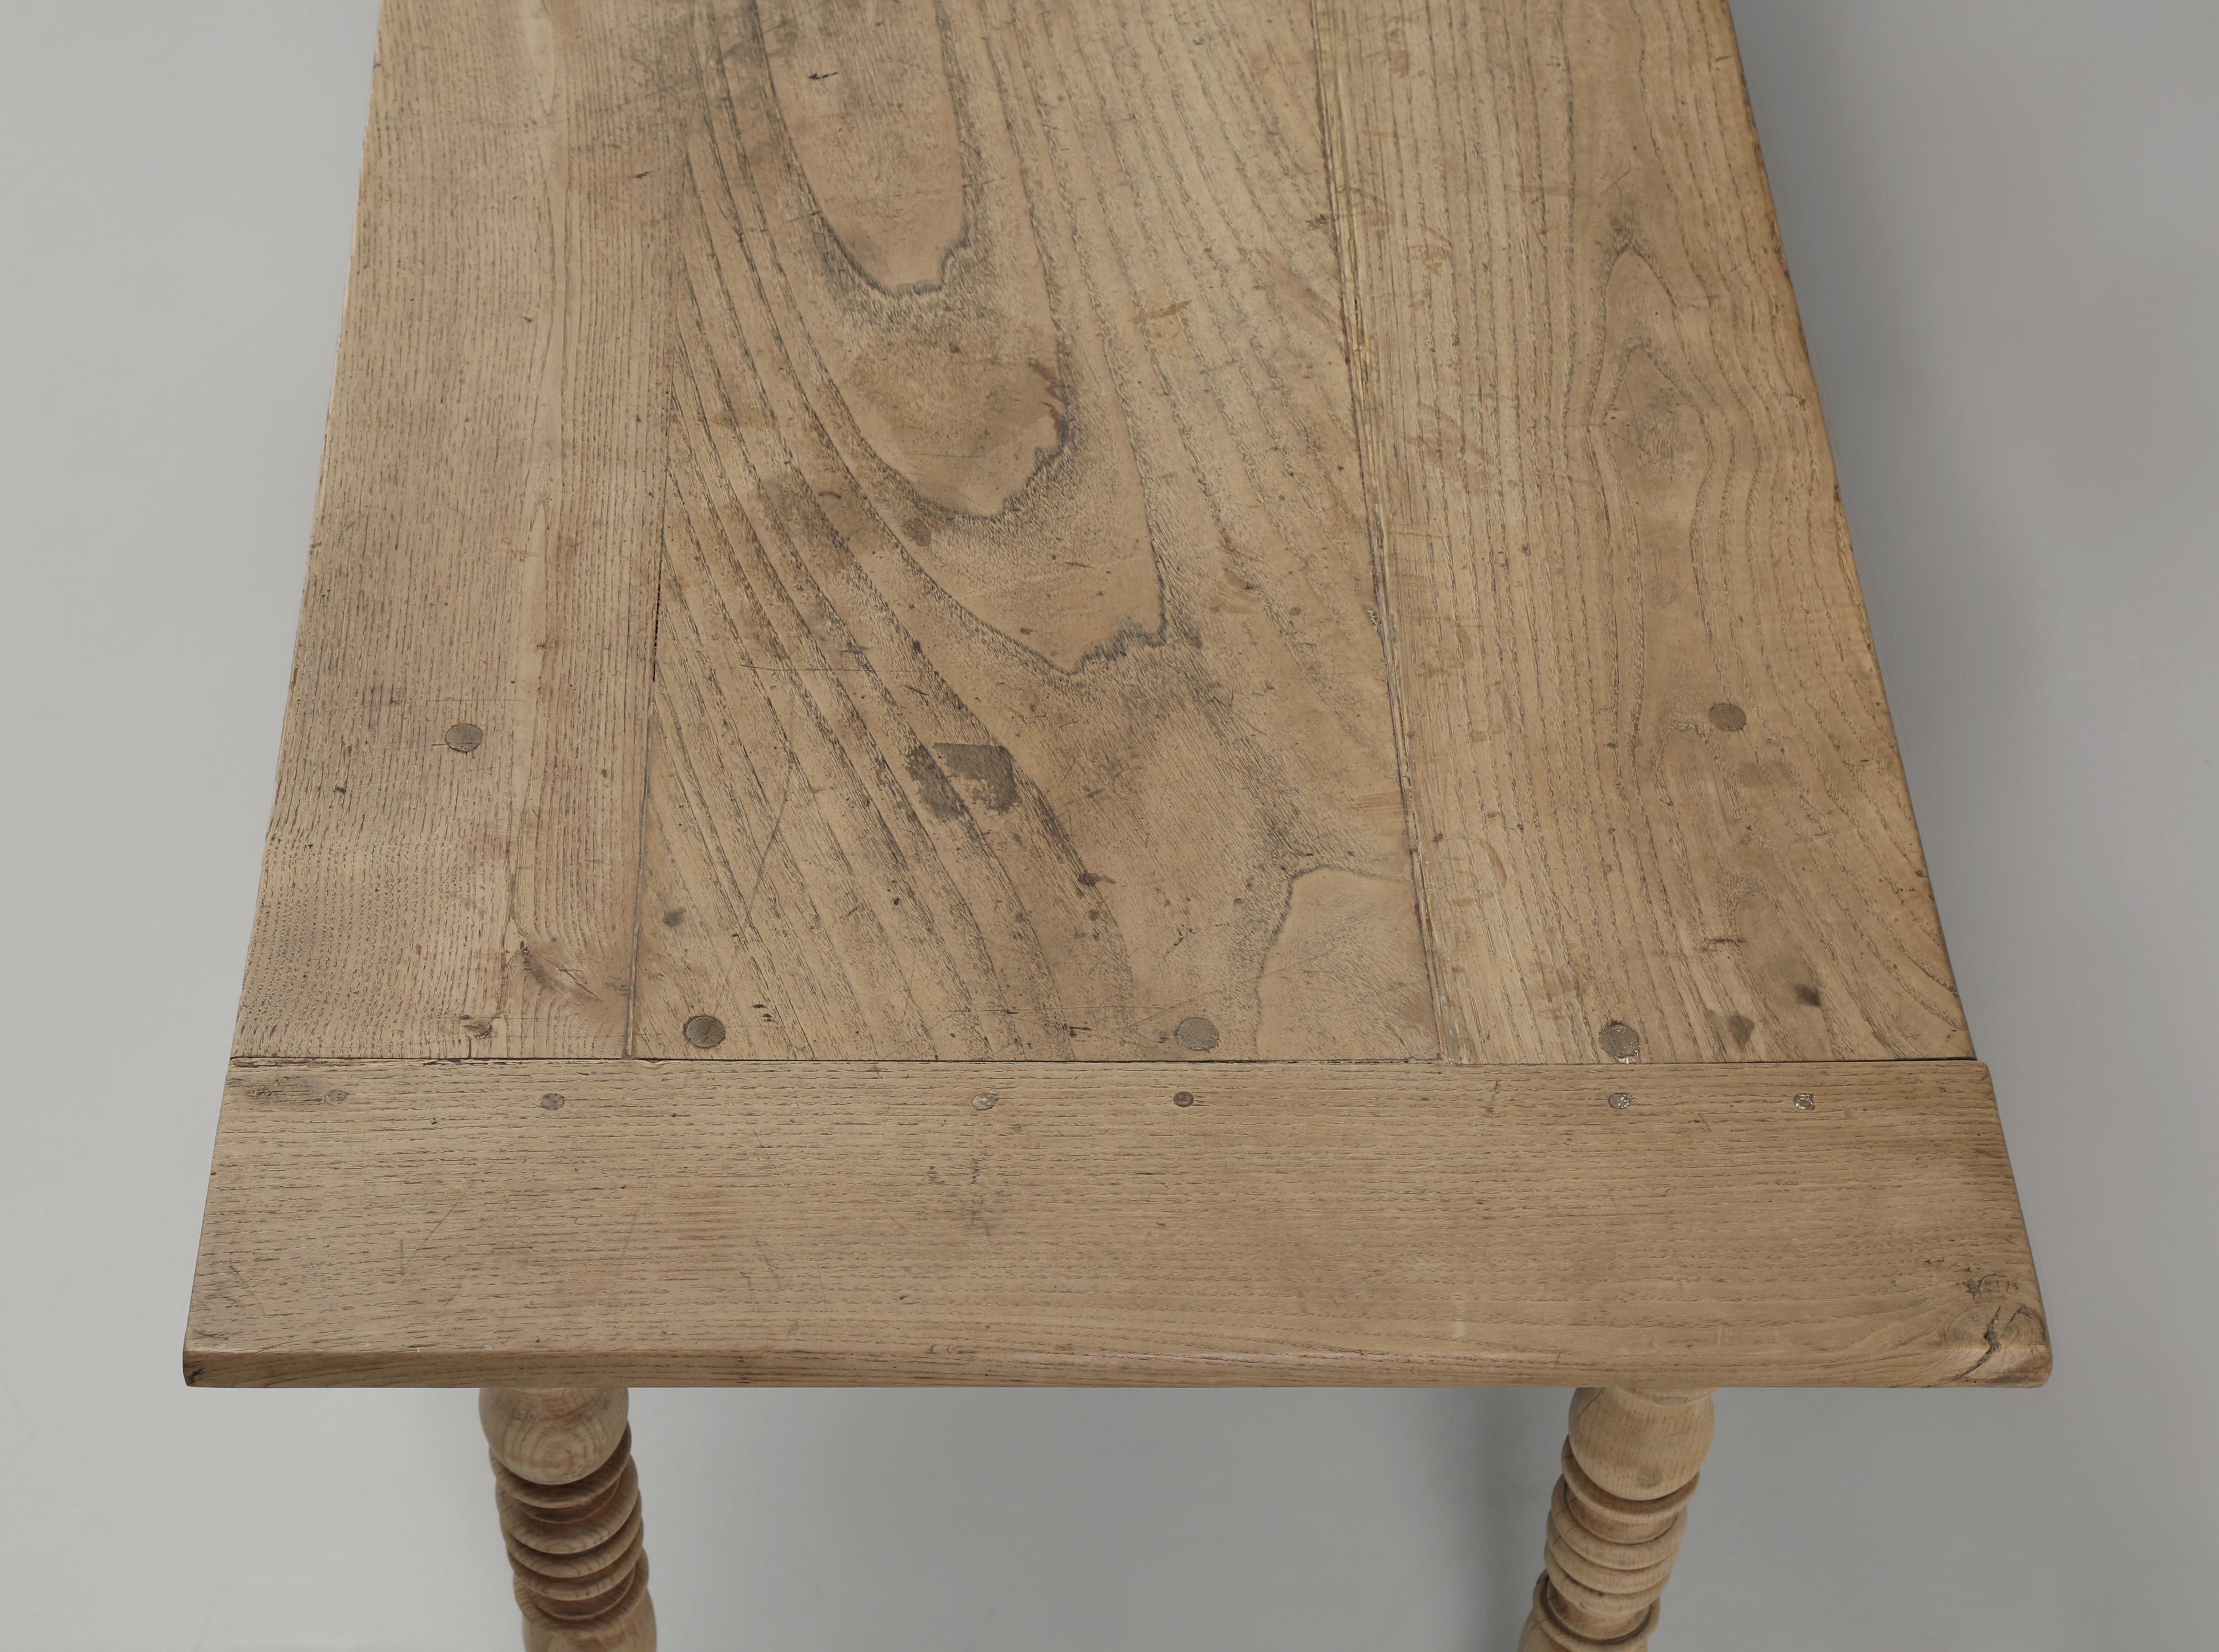 Hand-Crafted Antique French White Oak Farm Table Pegged 3-Board Top Old Plank Washed Finish